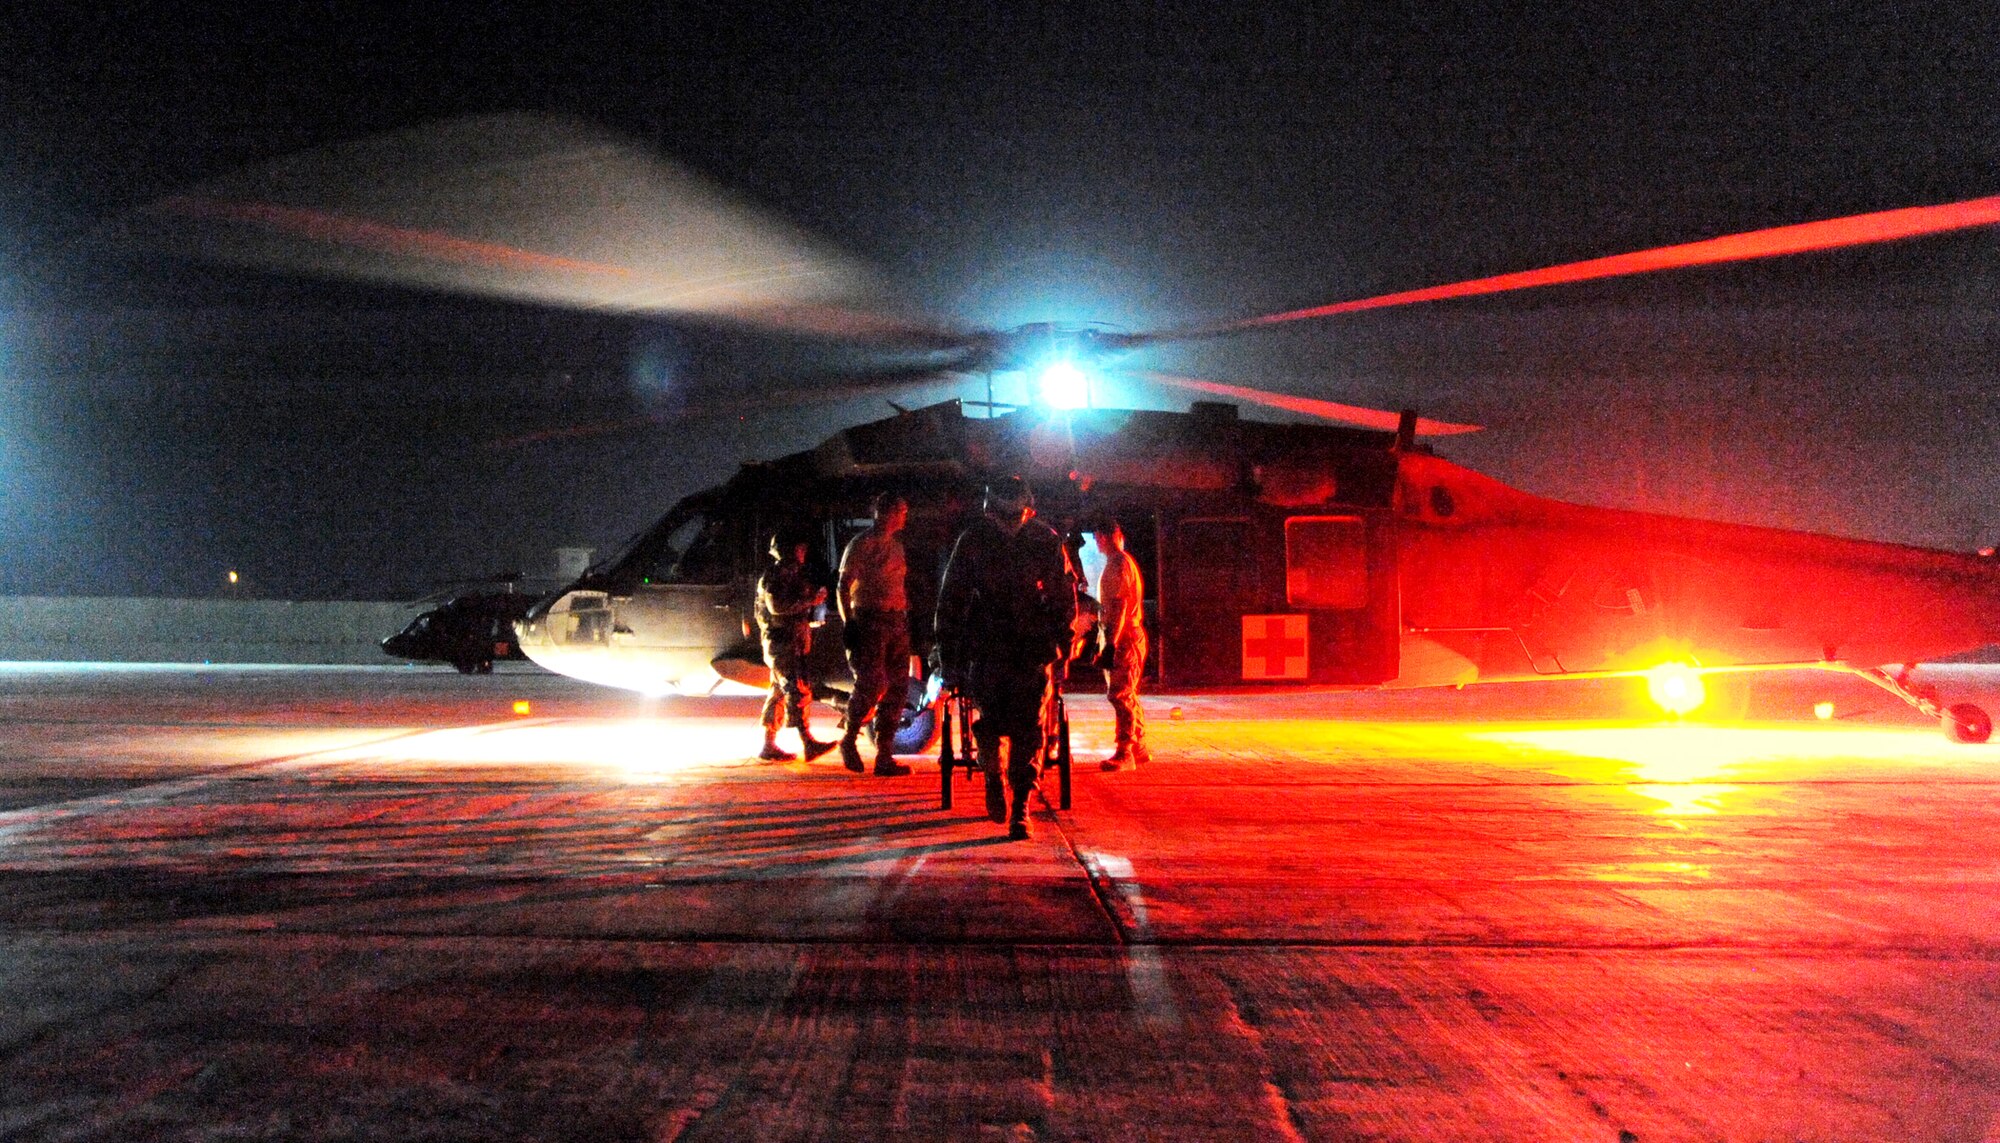 JOINT BASE BALAD, Iraq – Hospital volunteers transport a patient toward the emergency department on a litter after unloading an HH-60G Pave Hawk at the Air Force Theater Hospital Nov. 2, 2009. Hospital volunteers spend their free time assisting hospital personnel in a variety of ways, and are available in the event of a mass casualty. (U.S. Air Force photo/Senior Airman Christopher Hubenthal)